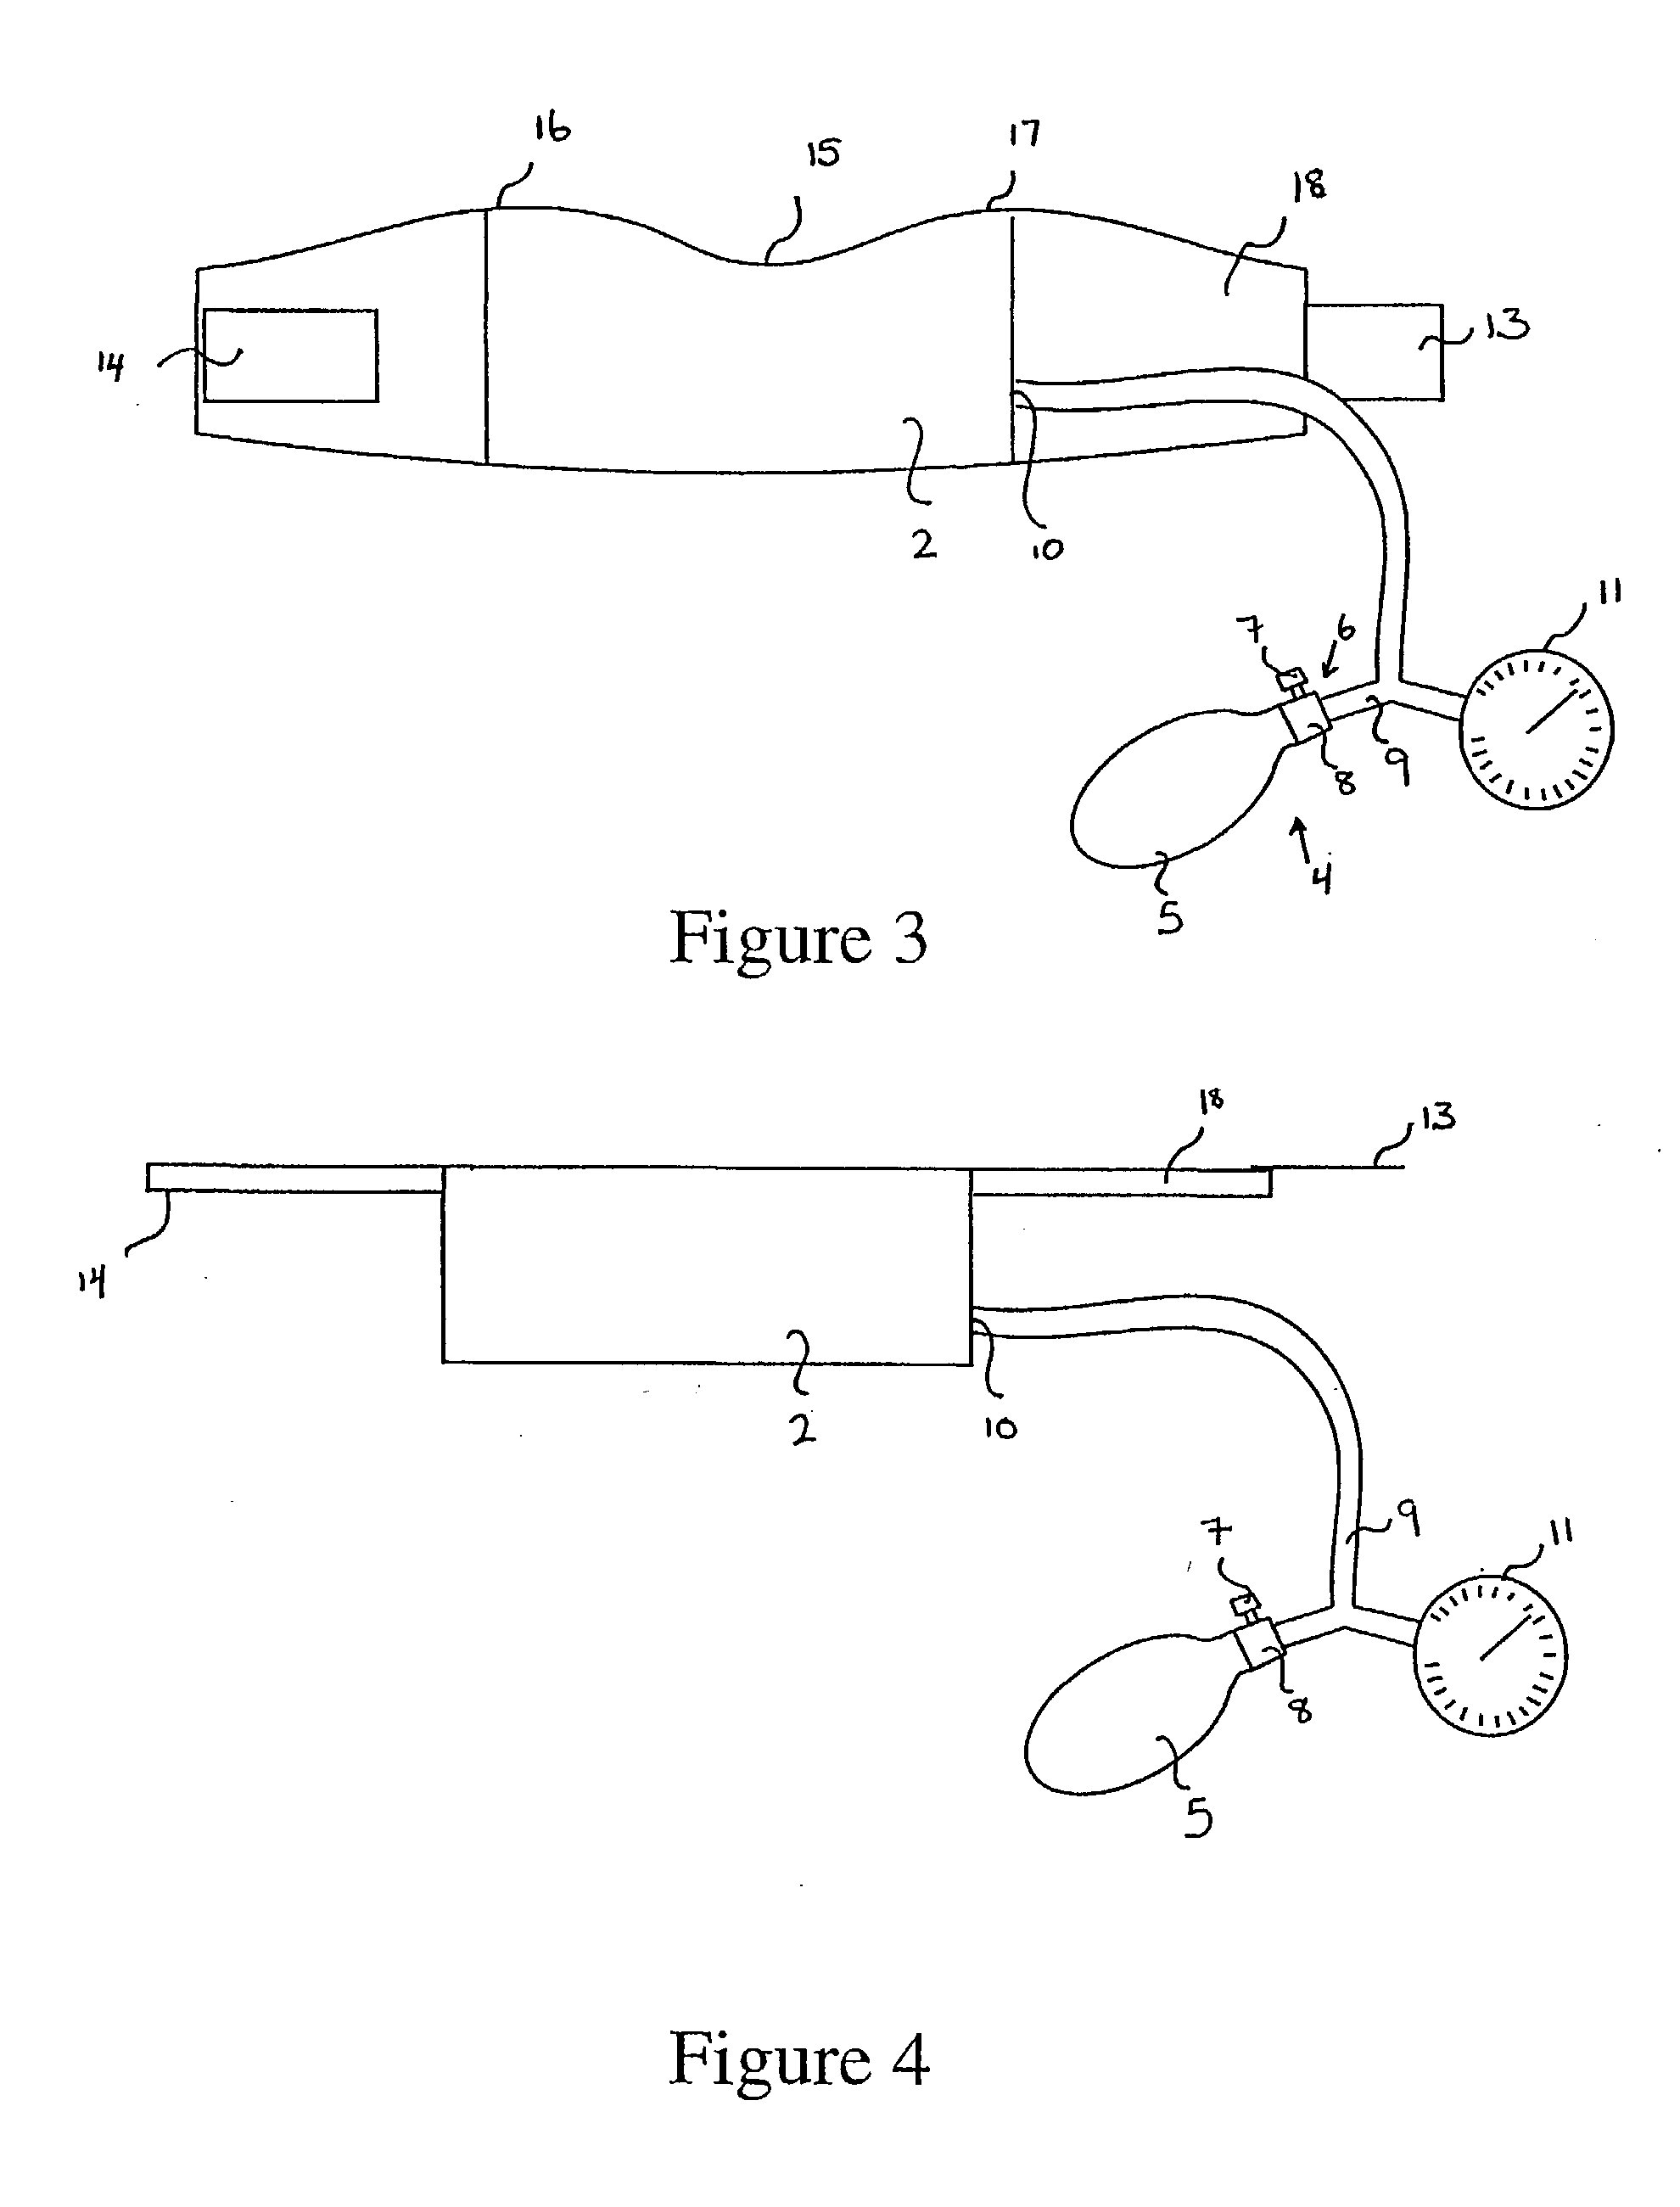 Apparatus and method for exercising and monitoring the performance of the upper flexor muscles of the neck